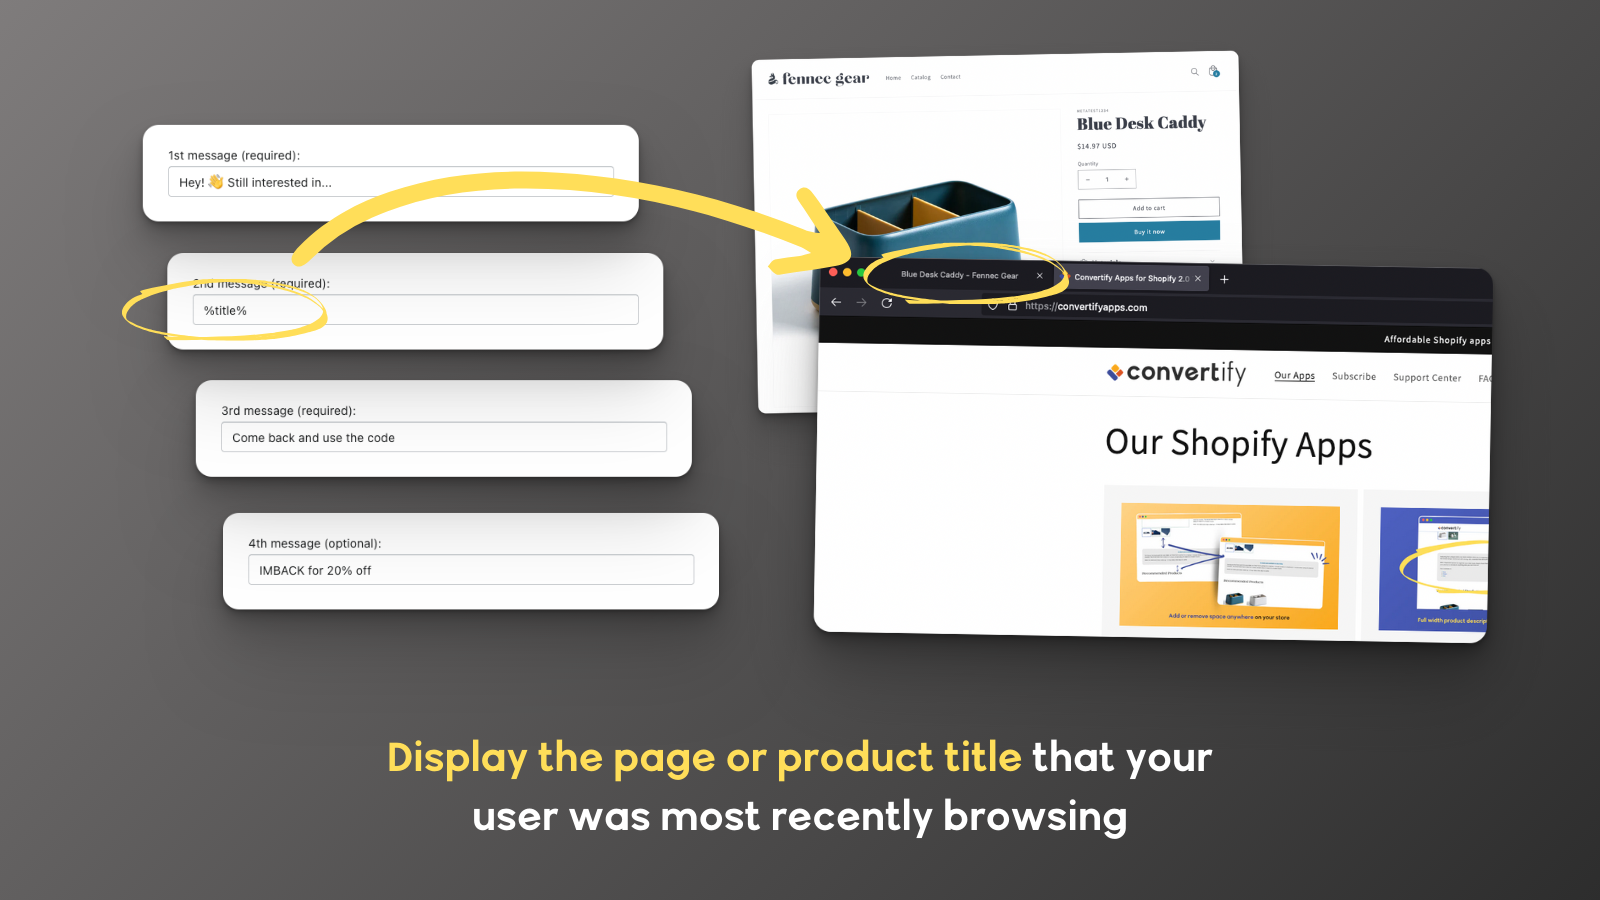 Display the page or product title as one of the messages